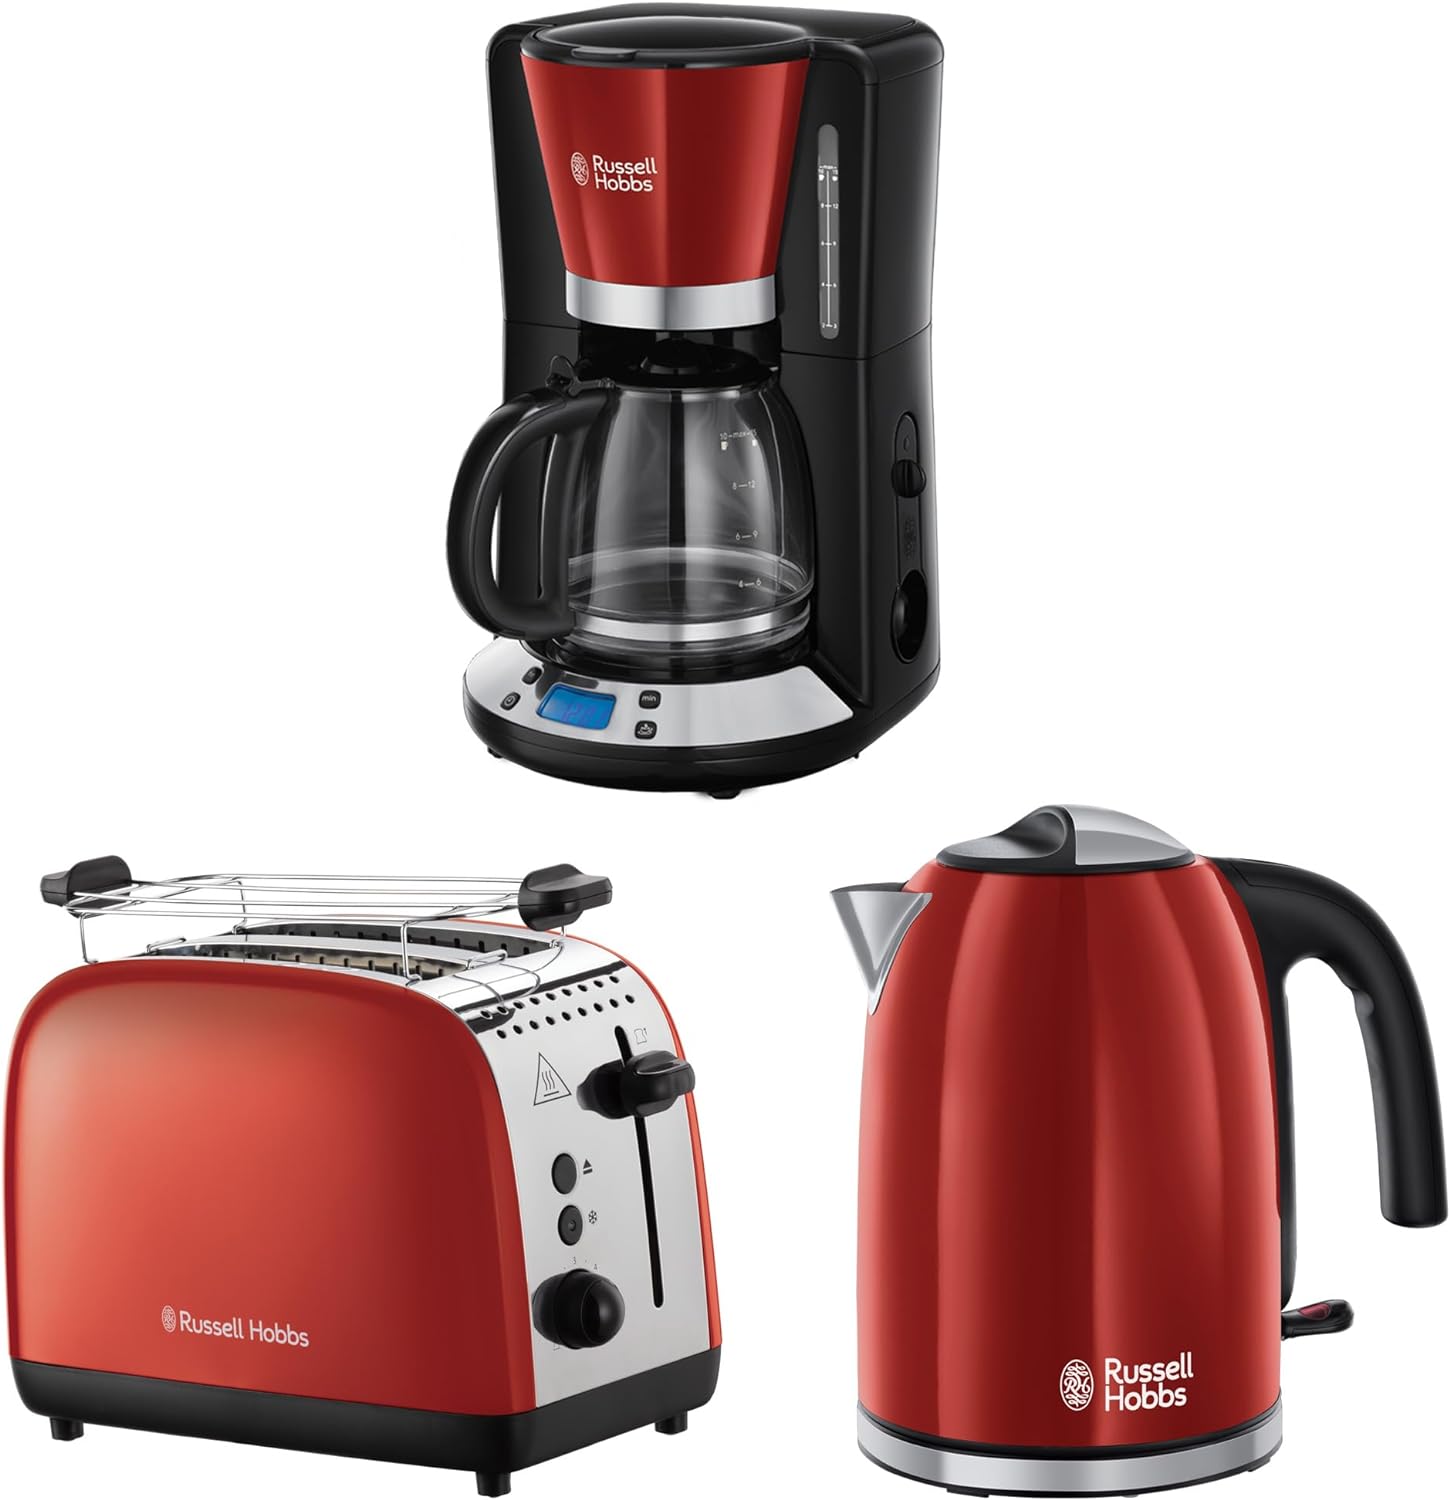 Russell Hobbs Breakfast Set Colours+ Red: Coffee Machine [Digital Timer, Shower Head for Optimal Extraction and Aroma] 24031-56 + Kettle [1.7 L, 2400 W] 20412-70 + Toaster [for 2 Slices] 26554-56